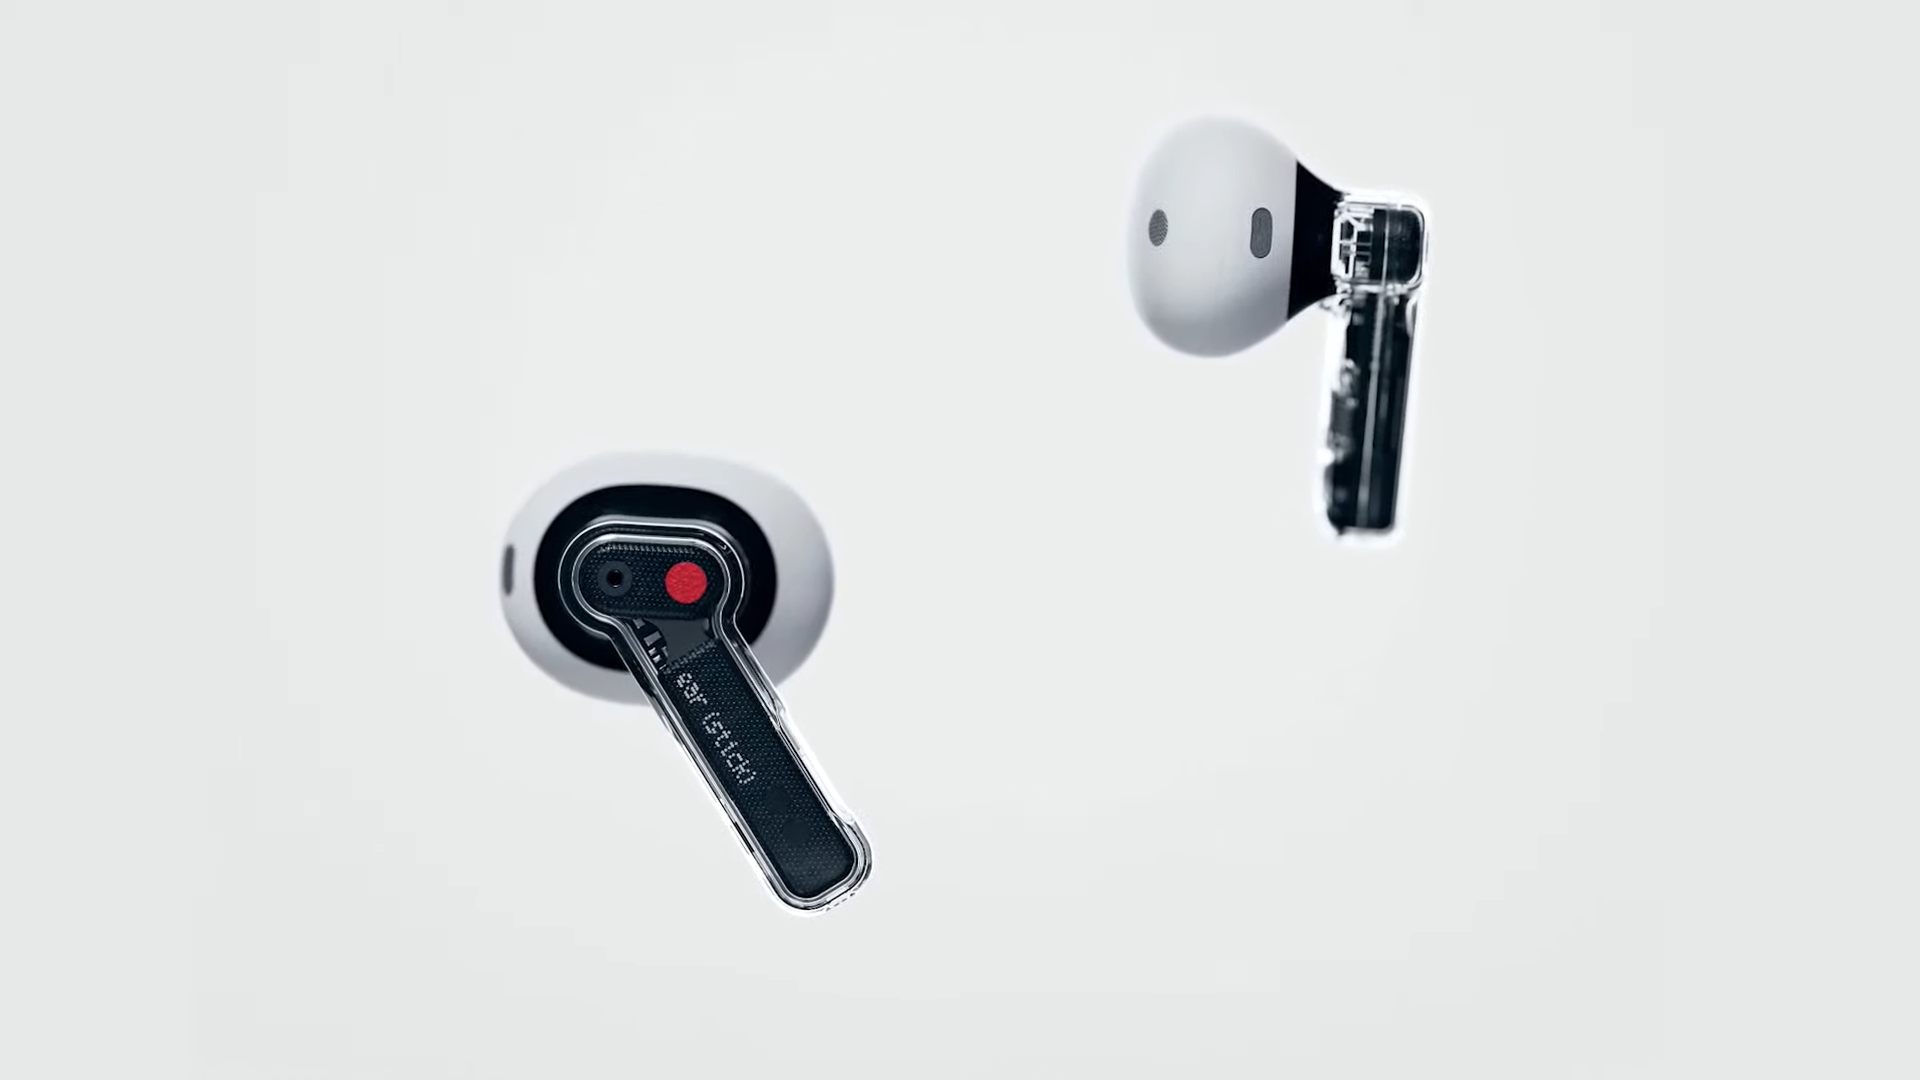 Nothing ear (stick) TWS earbuds launch with a new design, improved